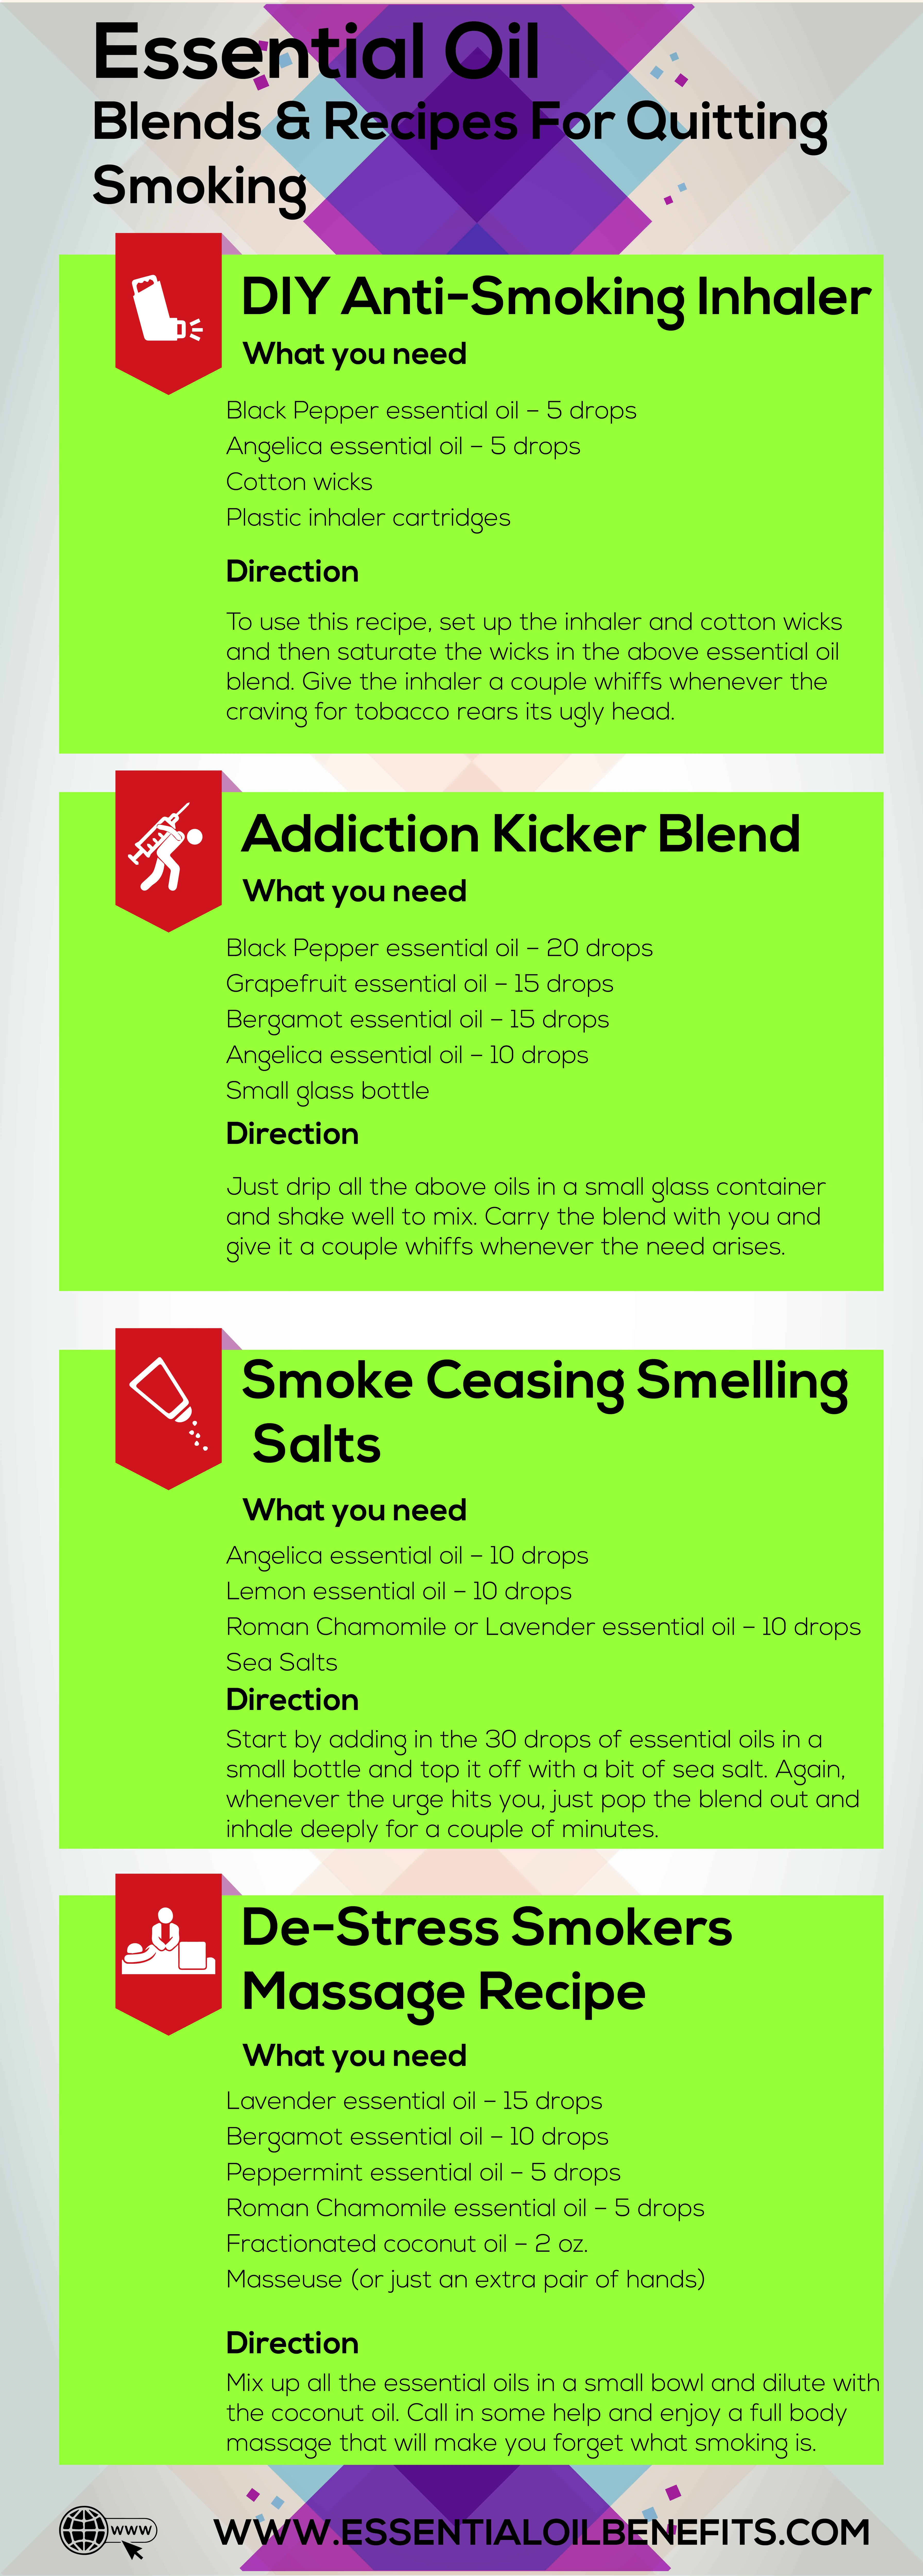 Essential Oils And Recipes That Can Help Quit Smoking Essential Oil Benefits